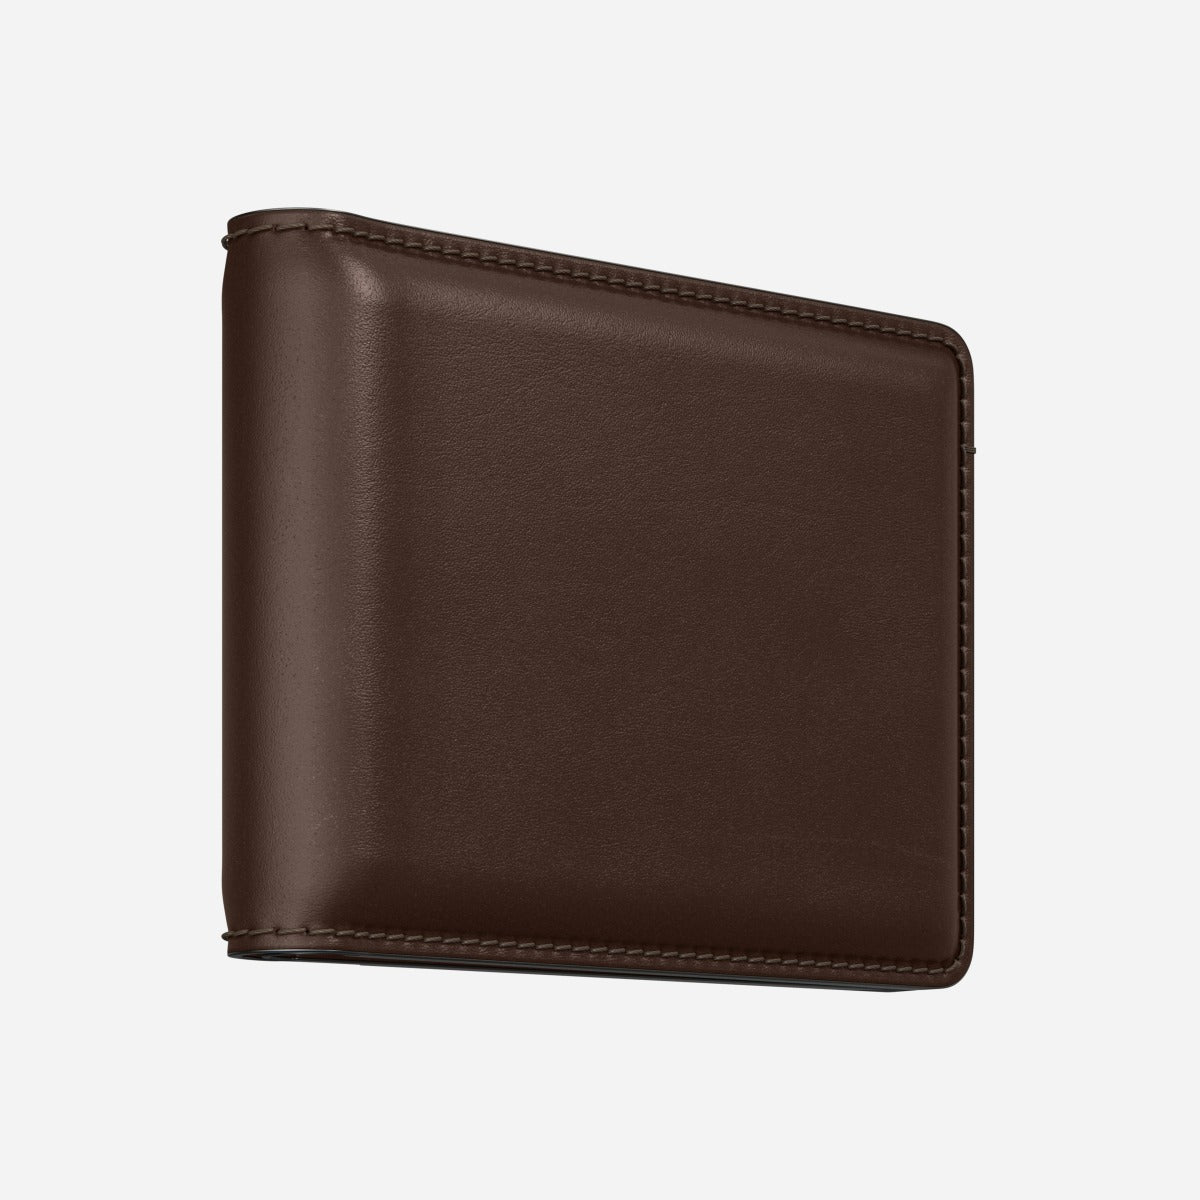 Nomad Bifold Wallet - Storming Gravity